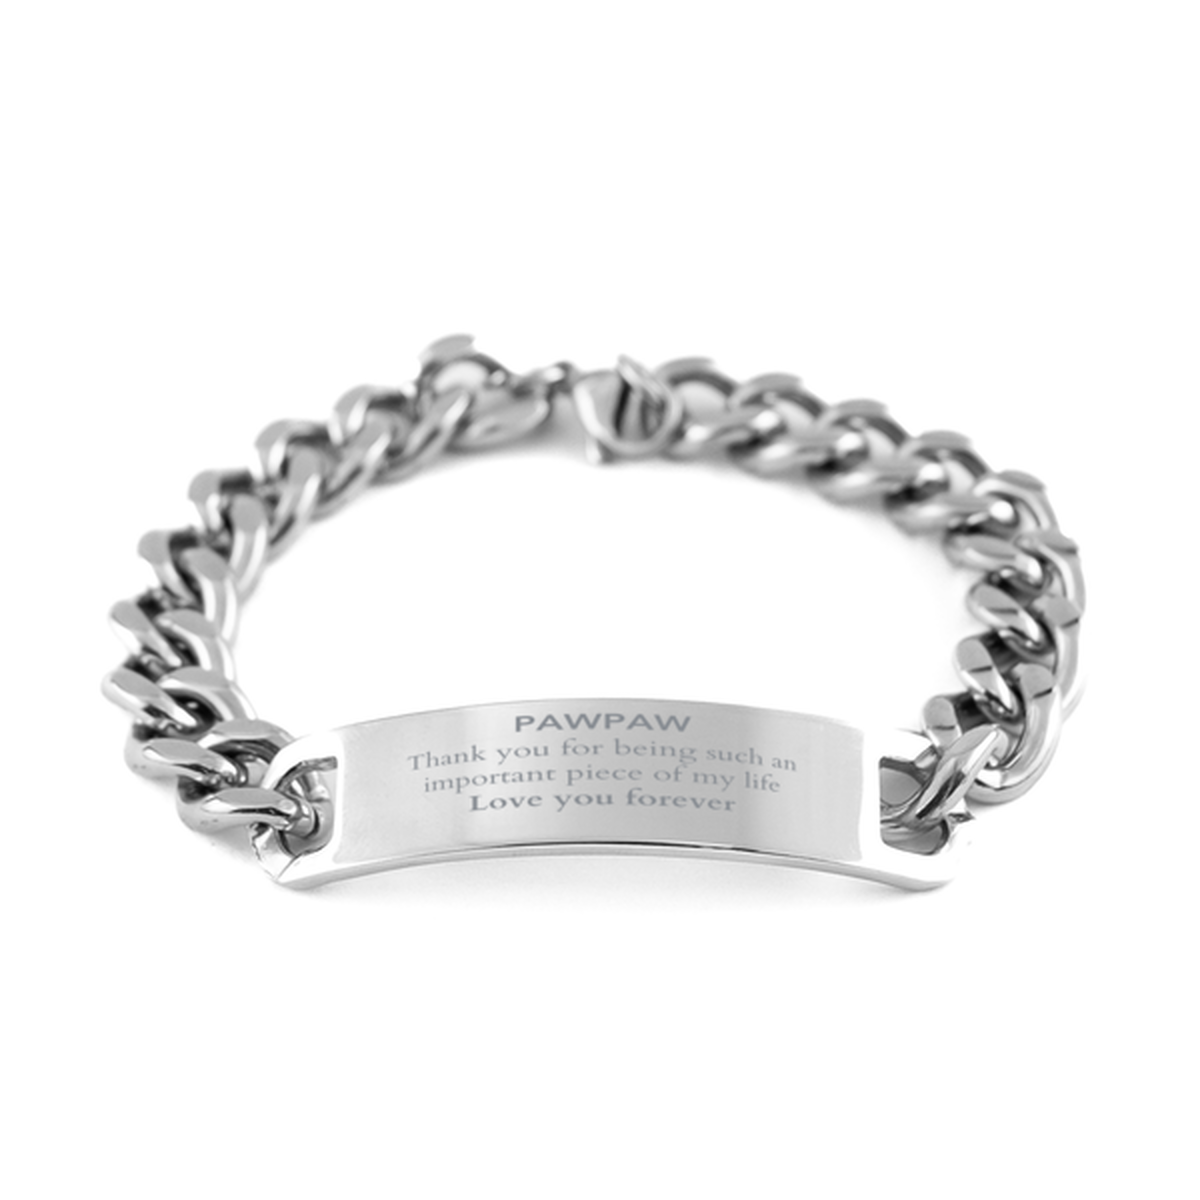 Appropriate Pawpaw Cuban Chain Stainless Steel Bracelet Epic Birthday Gifts for Pawpaw Thank you for being such an important piece of my life Pawpaw Christmas Mothers Fathers Day